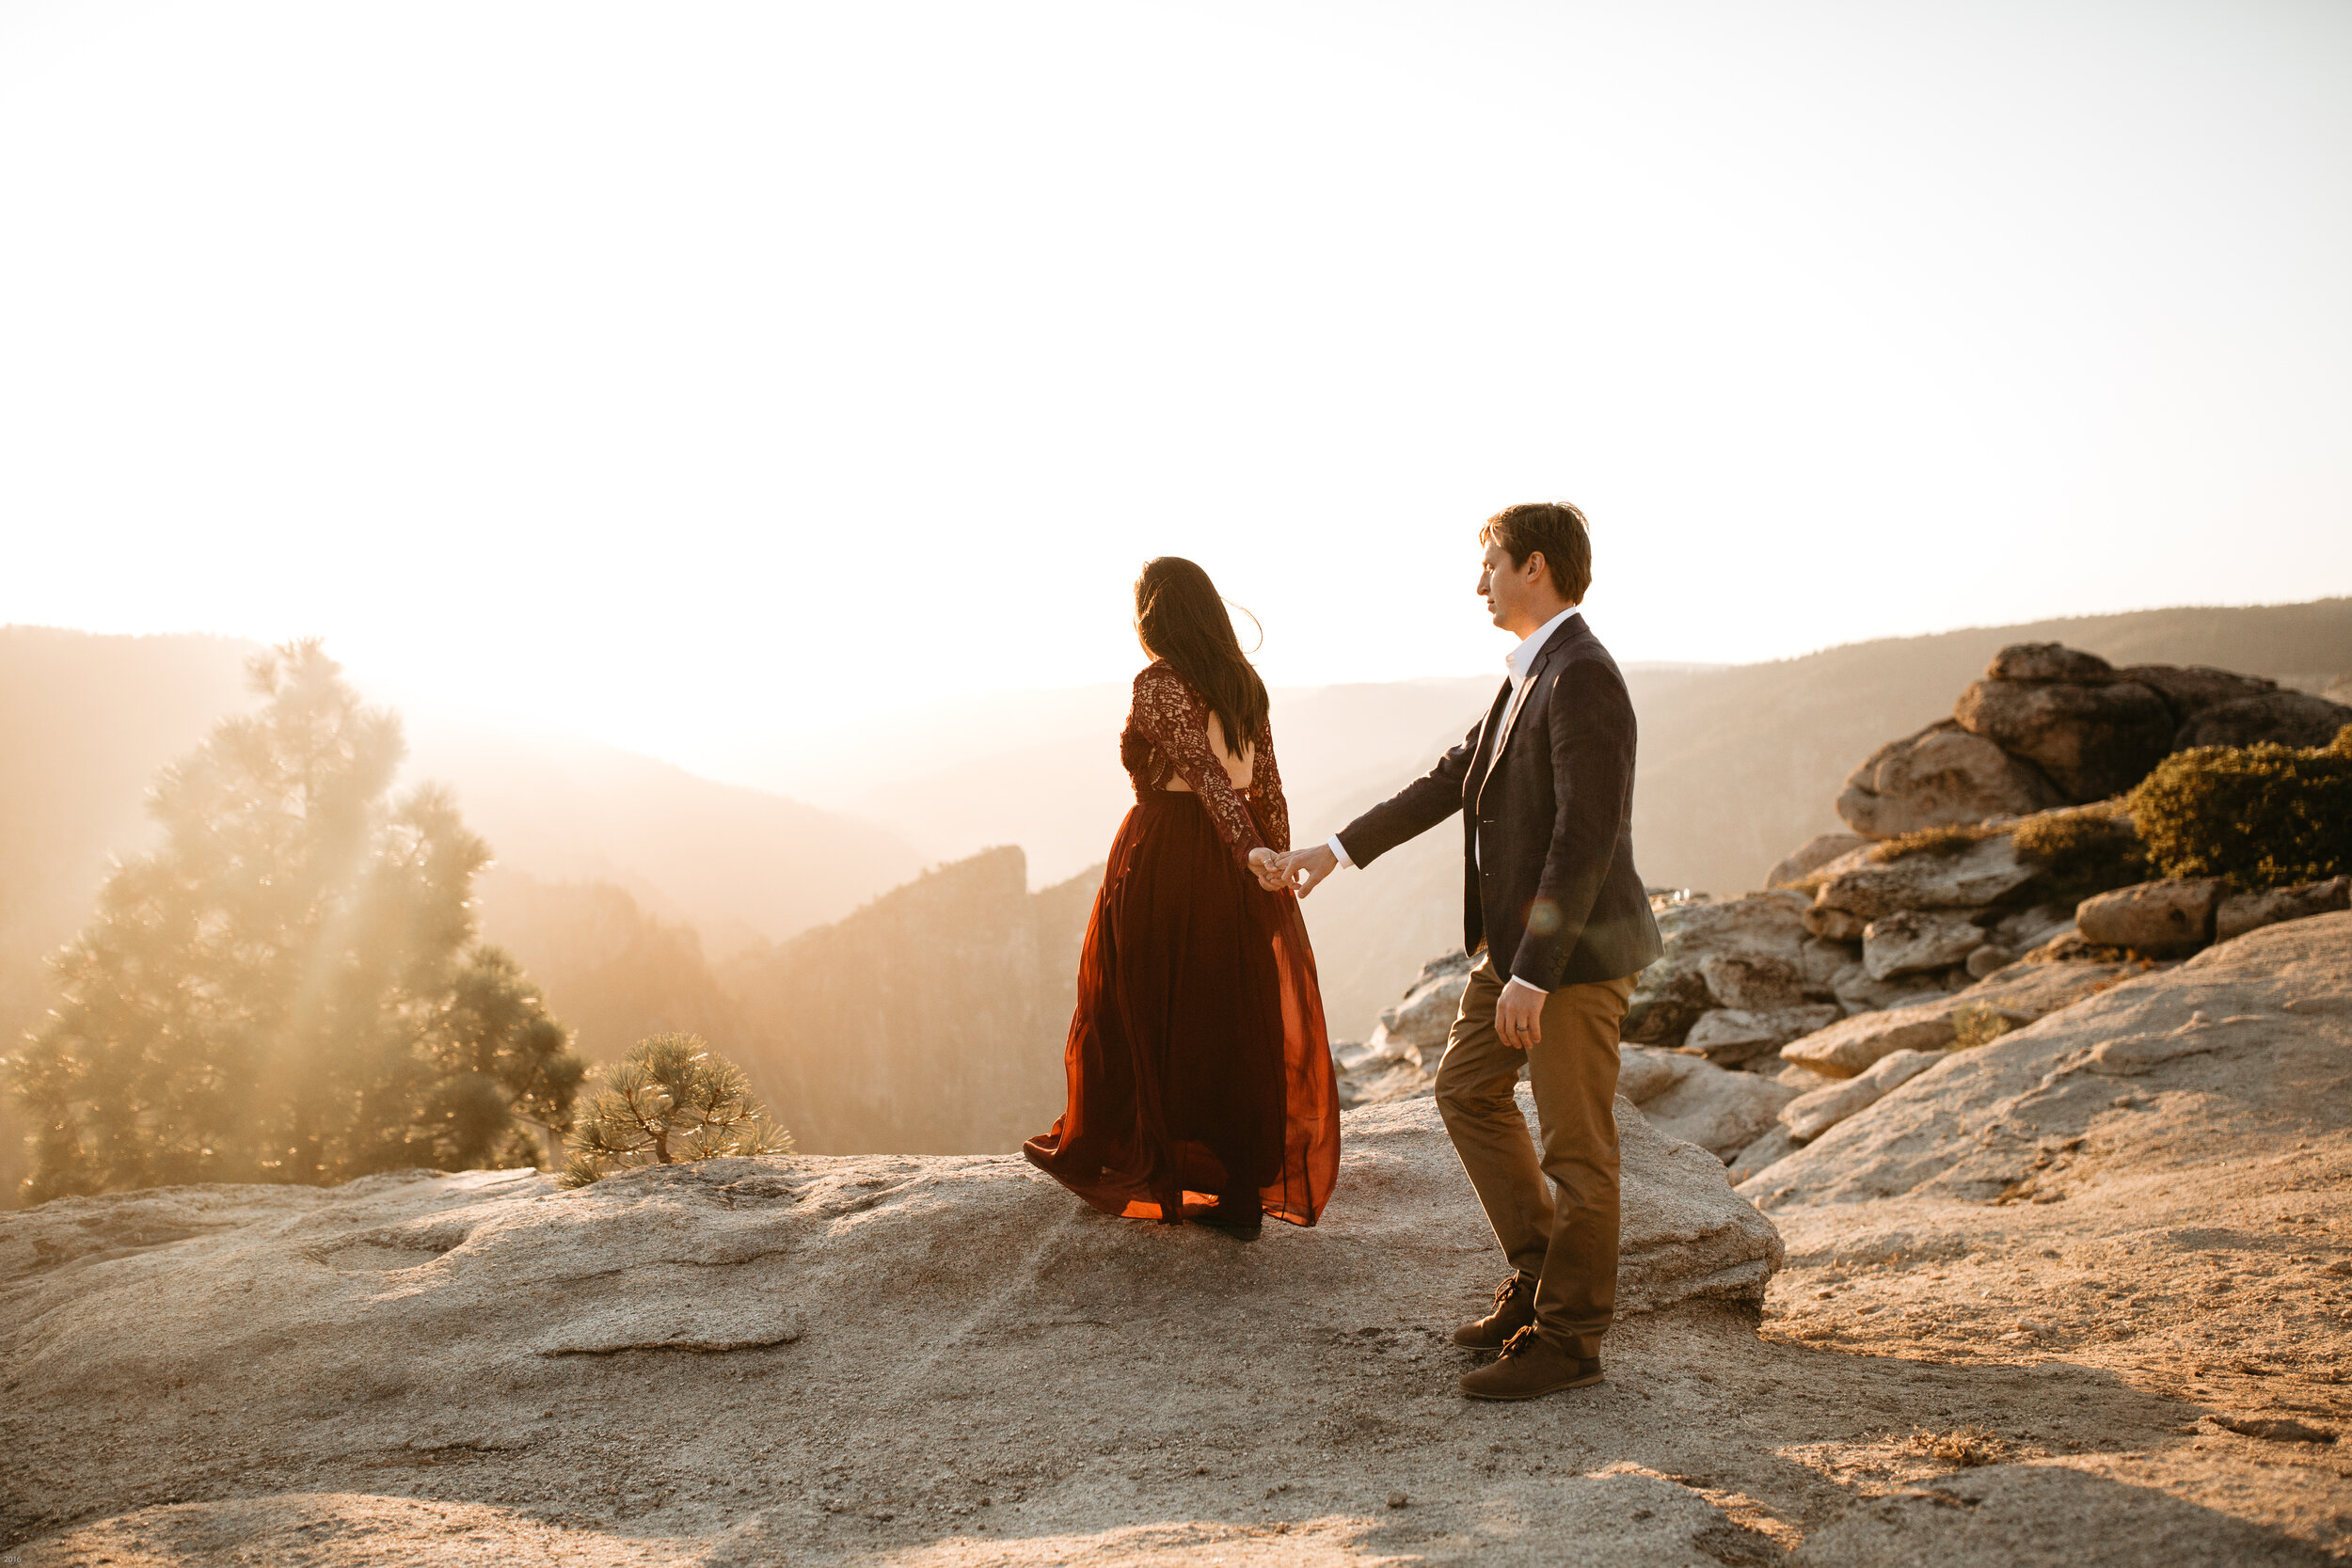 yosemite-national-park-couples-session-at-taft-point-and-yosemite-valley-yosemite-elopement-photographer-nicole-daacke-photography-141.jpg